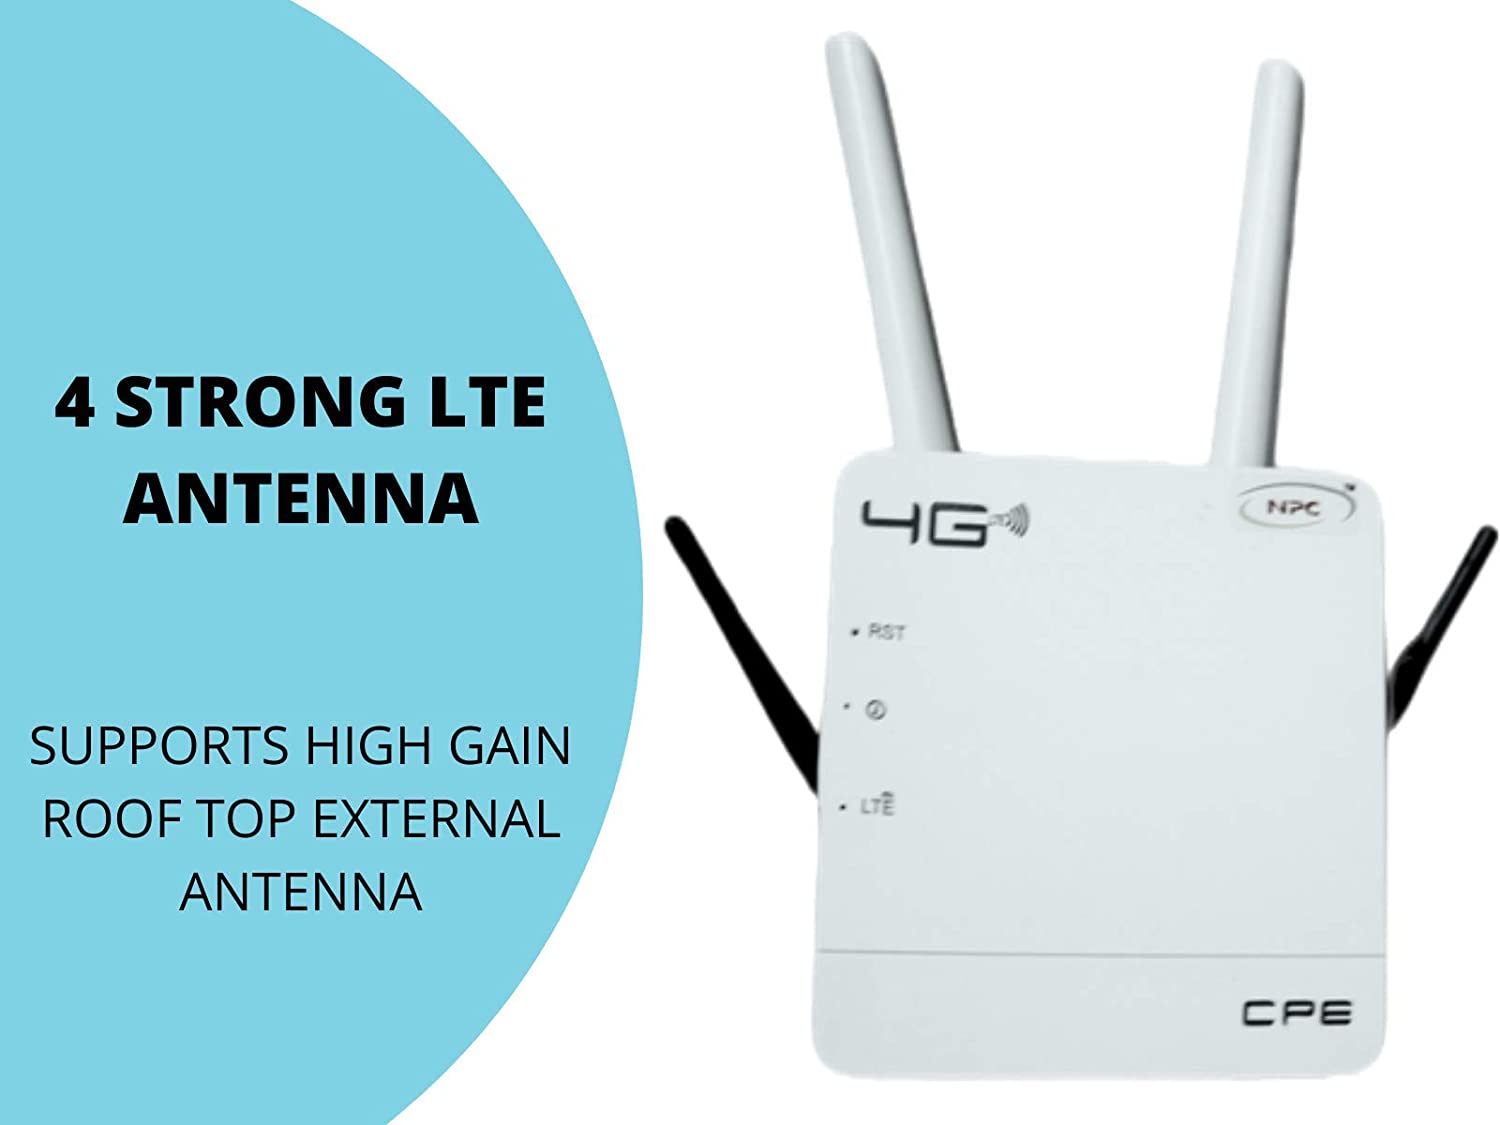 NPC Router - All SIM Based with 4 Antenna Port Enabled for ROOF TOP Antenna), Free HIGH GAIN External Antenna, 1 Year WARANTY